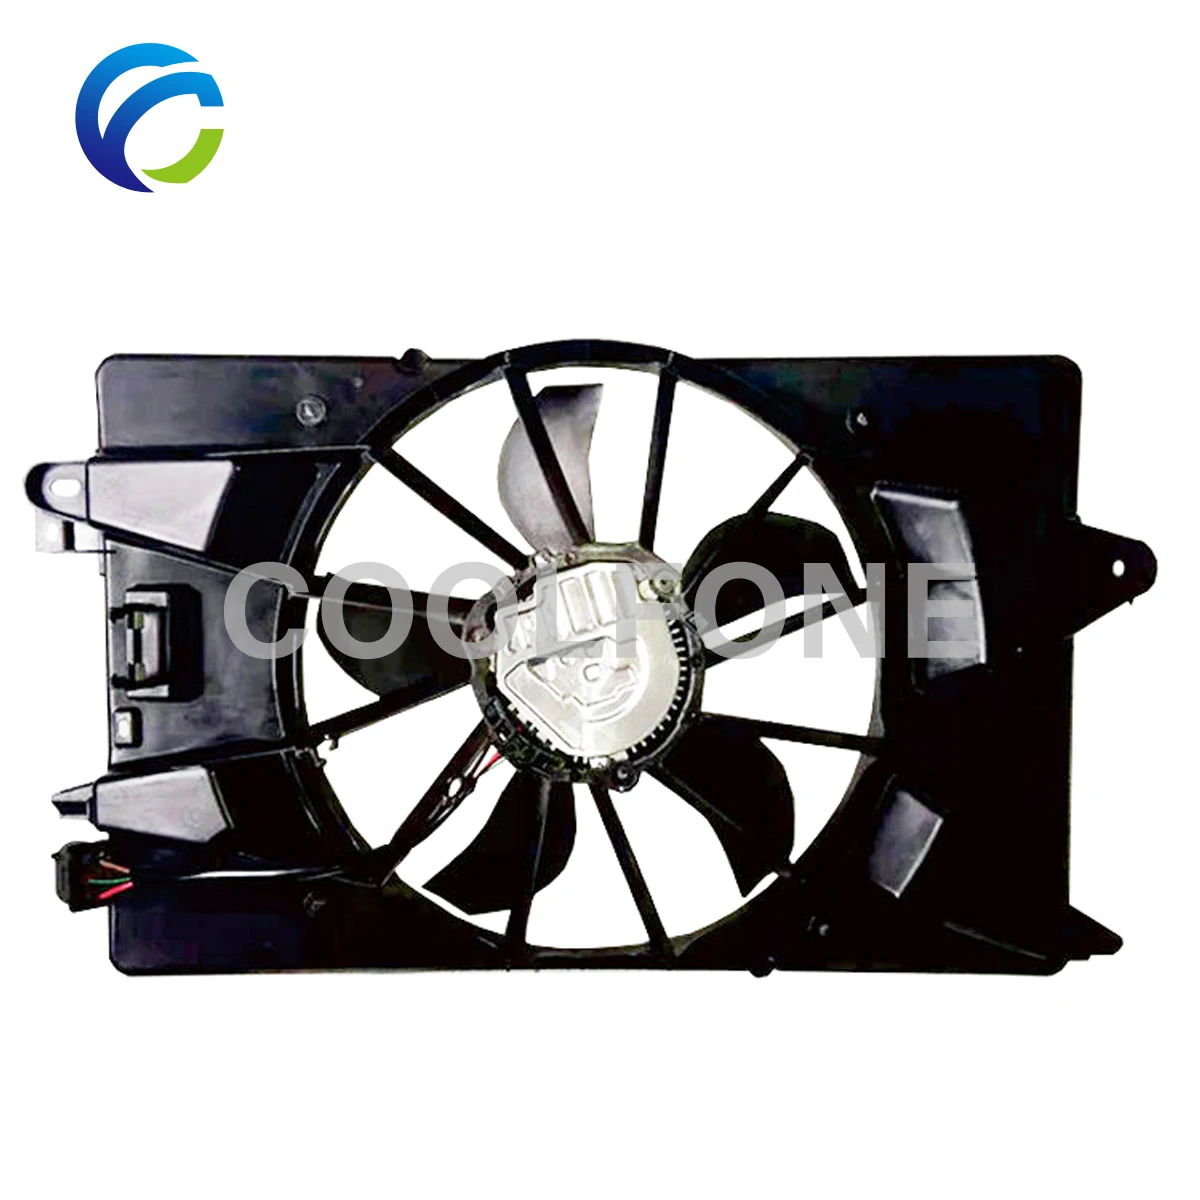 

Cooling Radiator Fan Assembly for DODGE DART FIAT VIAGGIO CHRYSLER 200 1.4T 2.0L 2.4L 55111482AC 68205996AB 68205996AC CH3115180